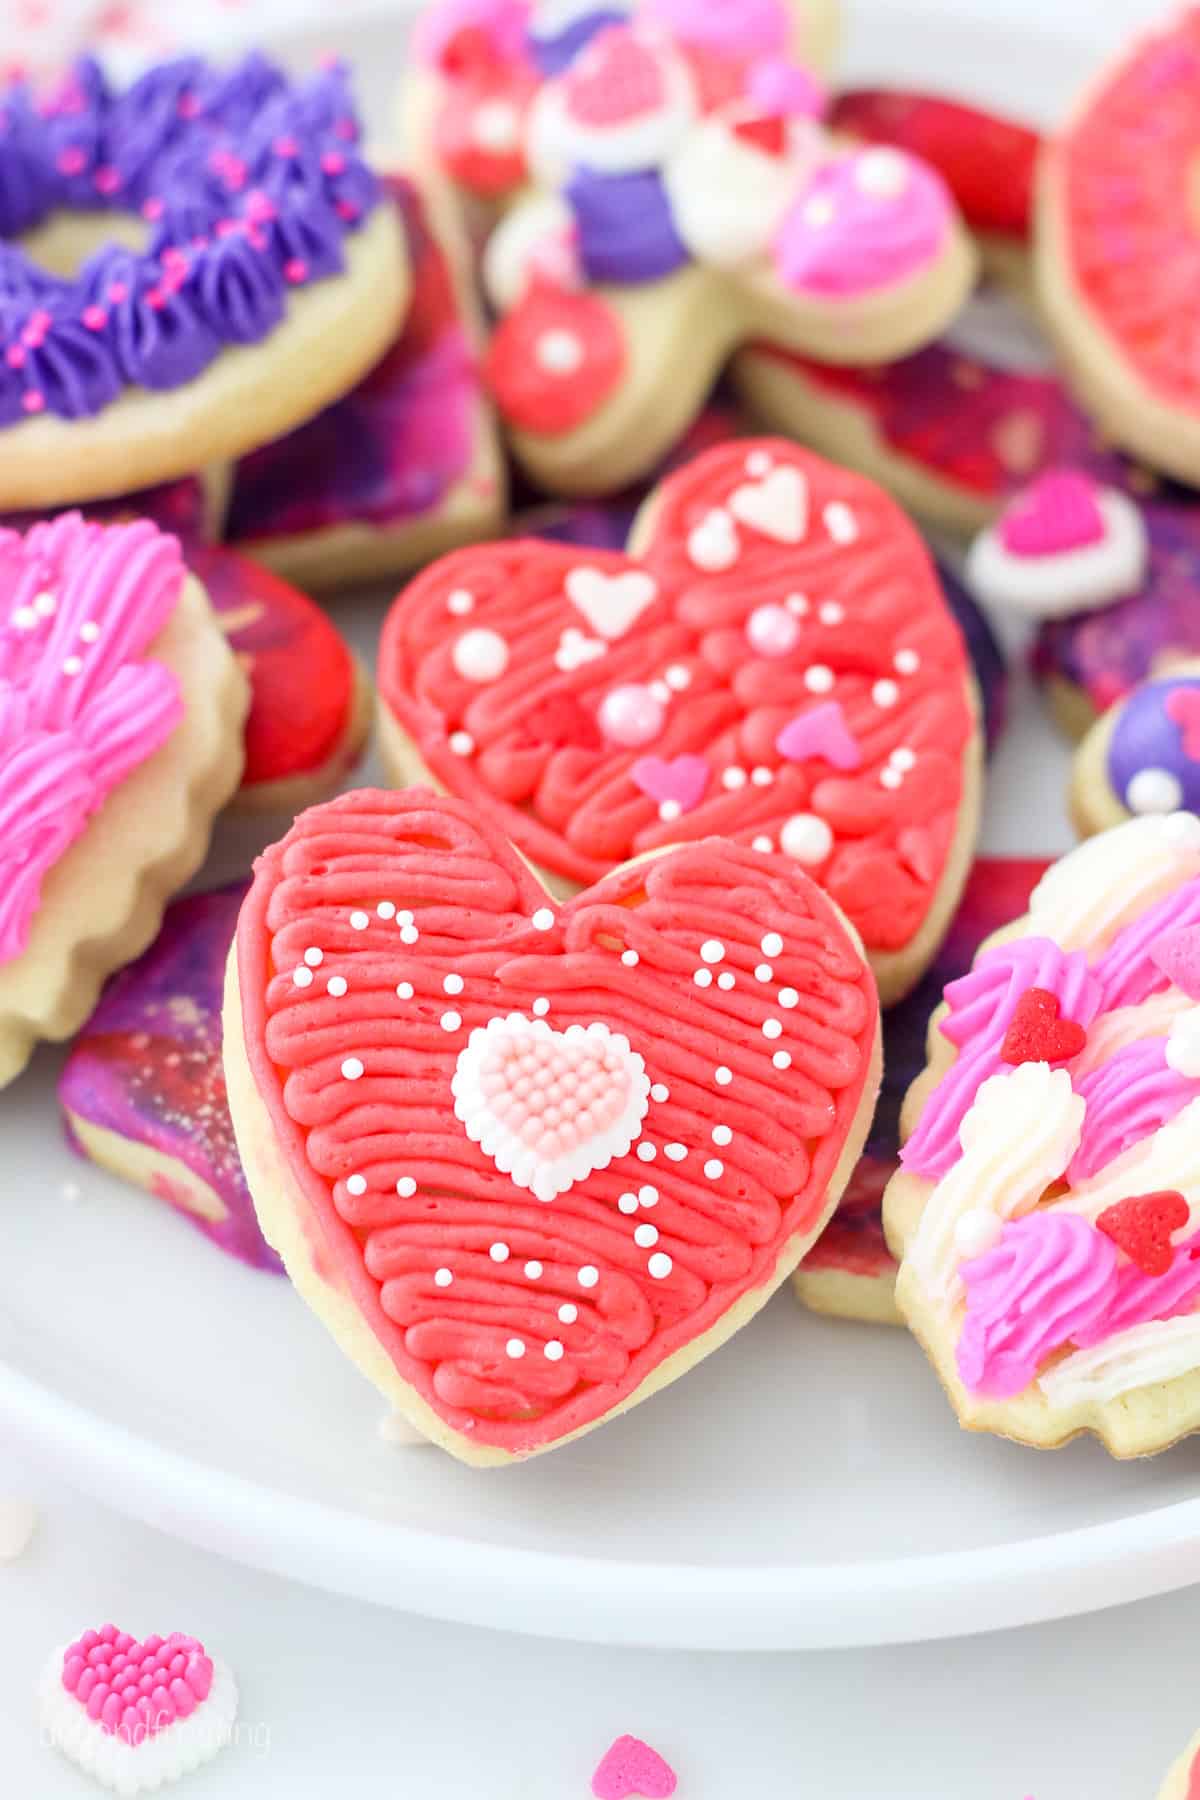 Close up of assorted Valentine's Day sugar cookies decorated with icing and frosting on a white plate.